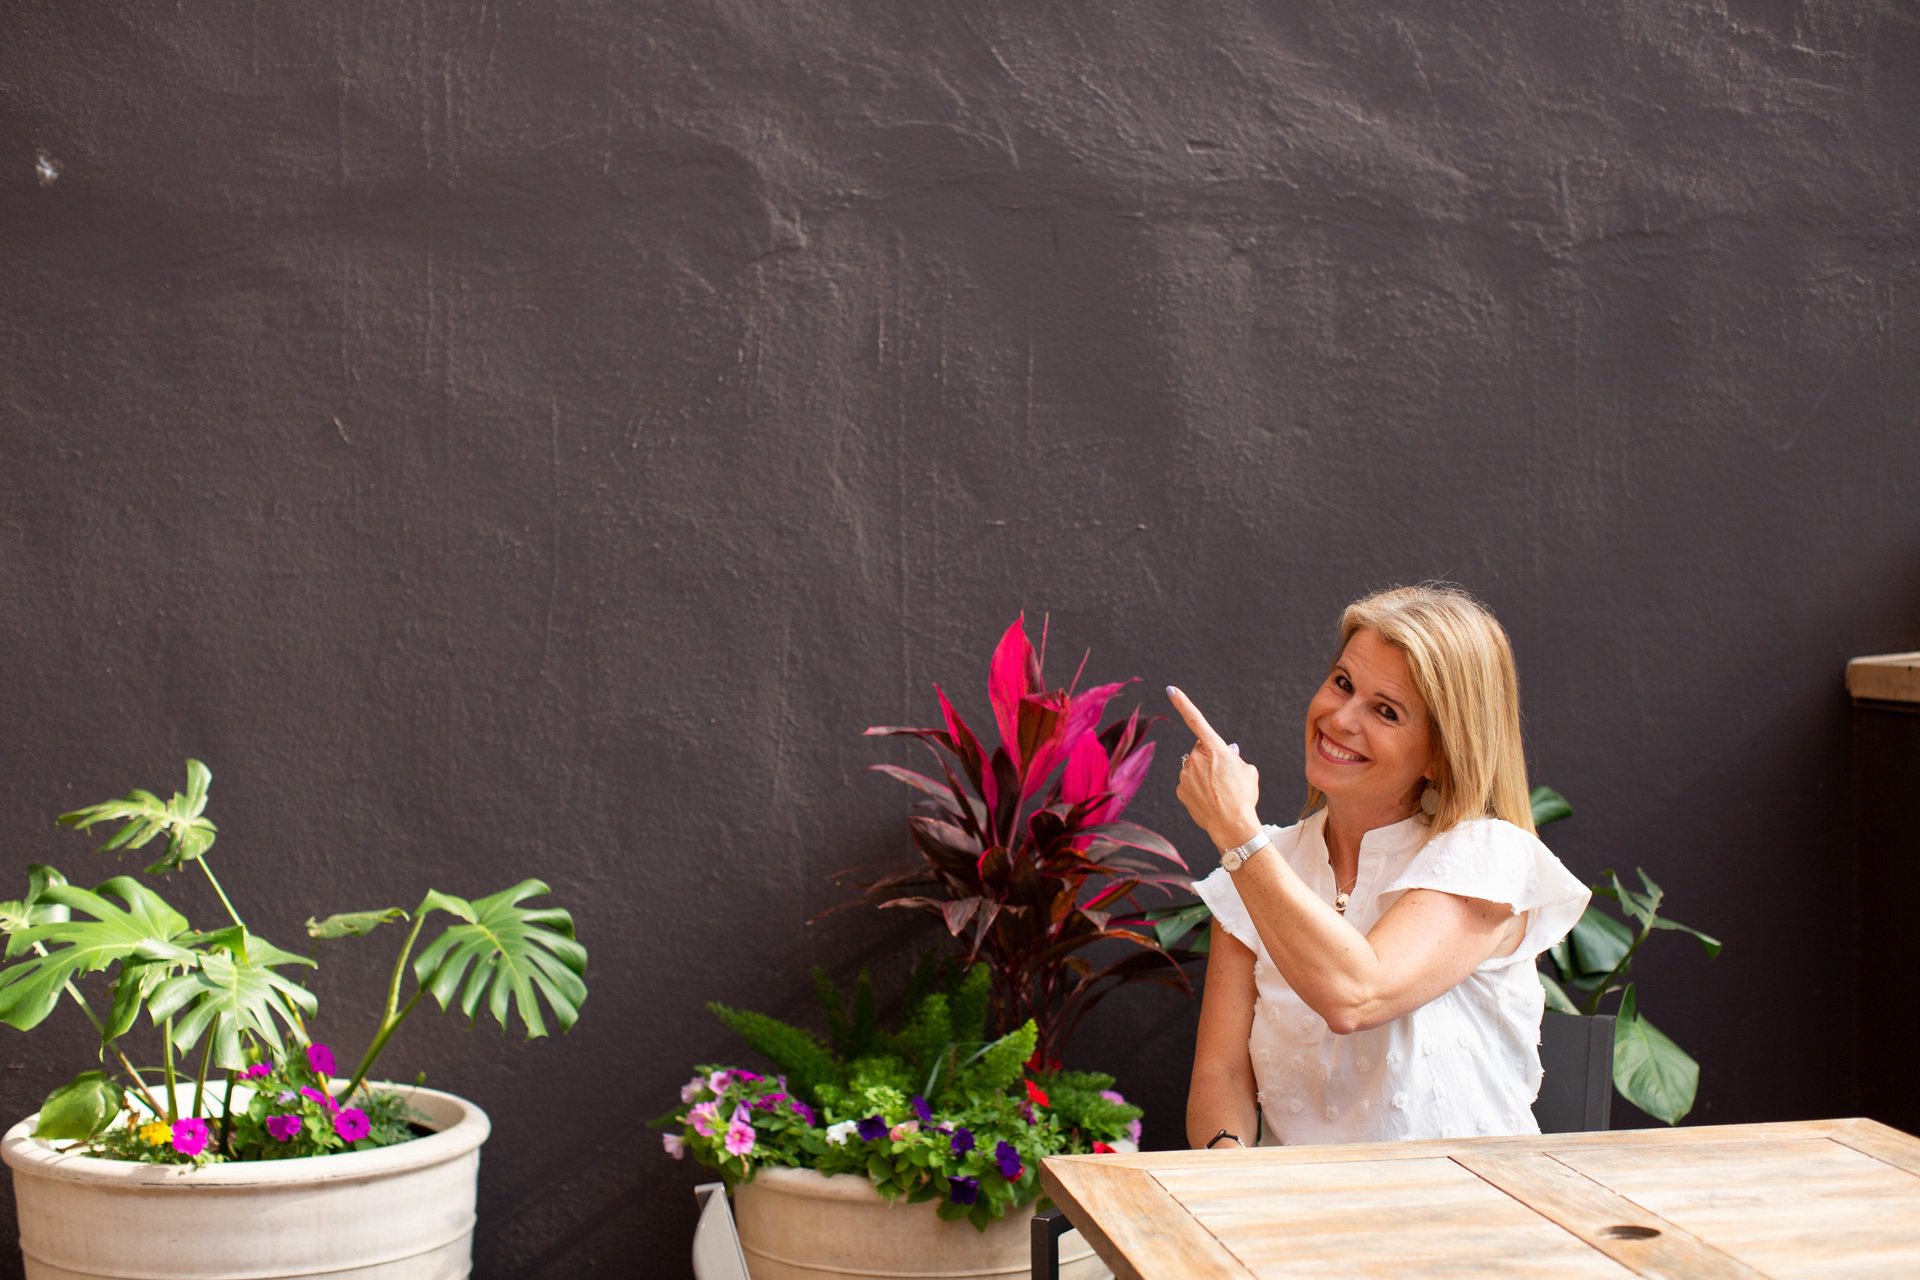 Laura nelson sitting a a wood table, in front of a dark wall and a pink flower, pointing upwards and smiling